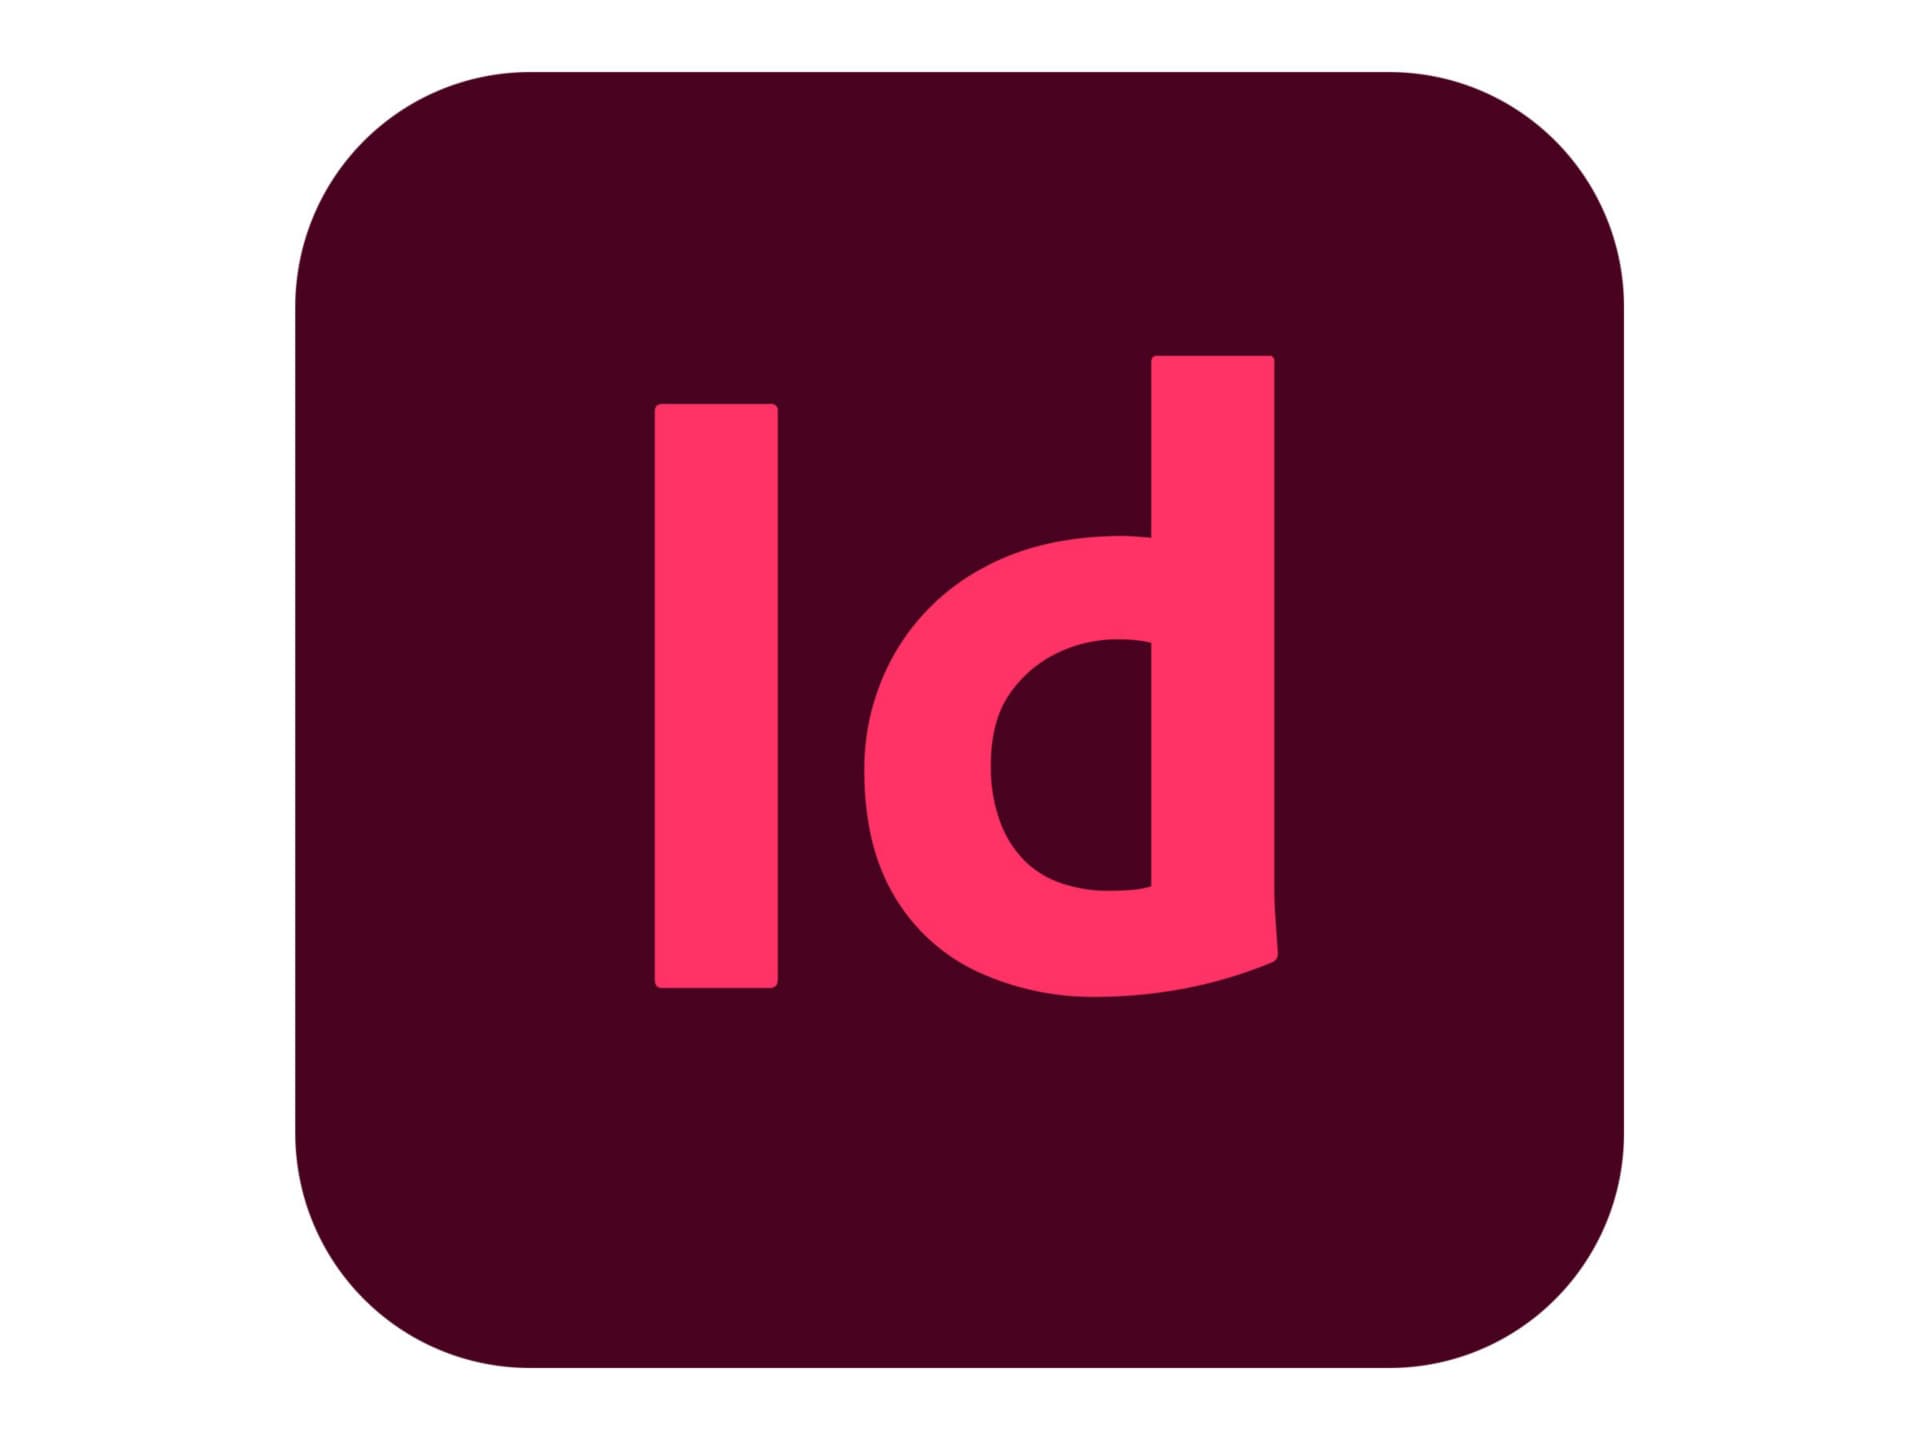 Adobe InDesign CC for teams - Subscription New (8 months) - 1 named user